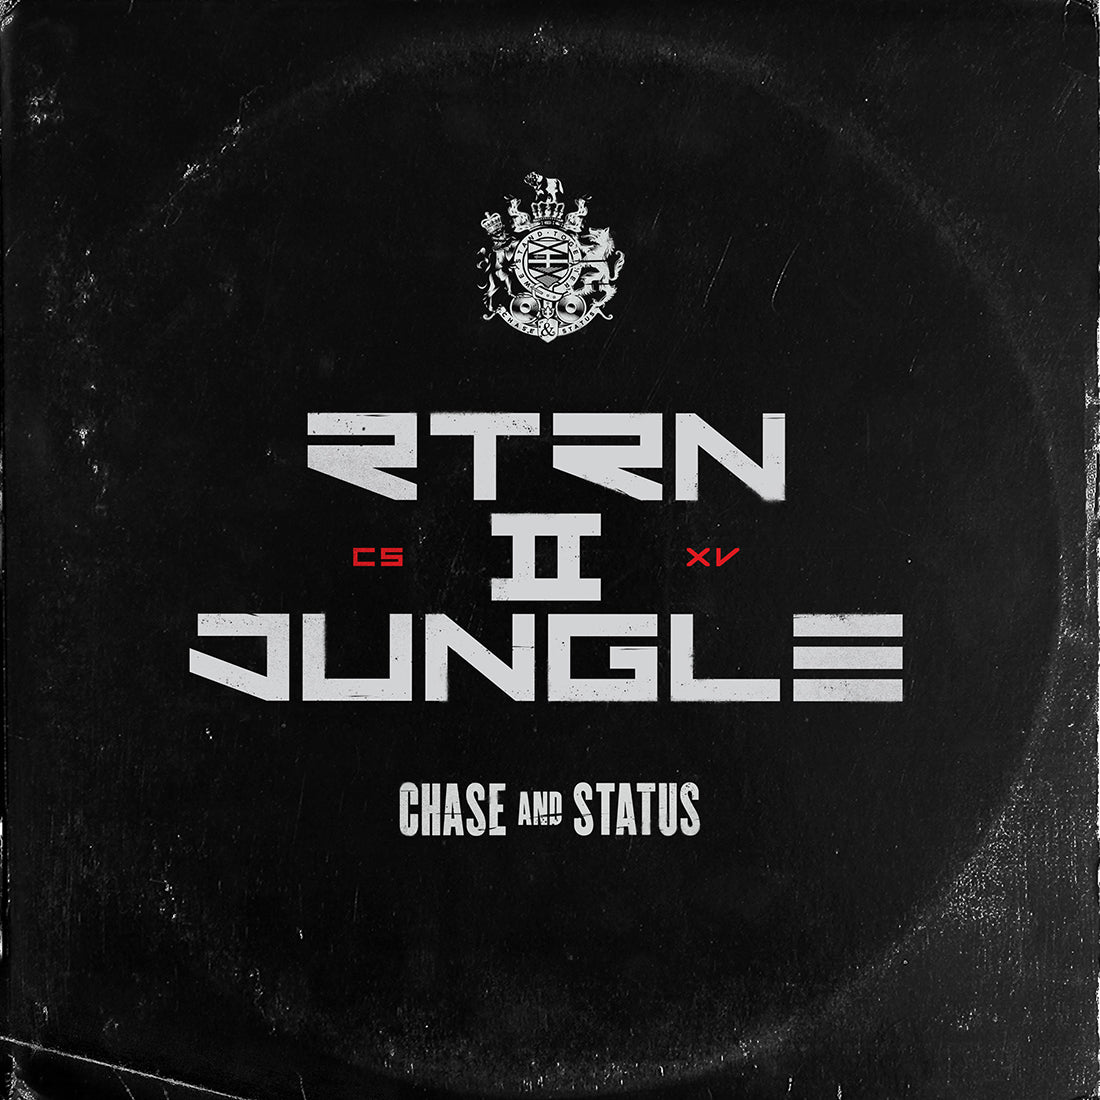 Chase and Status - RTRN II JUNGLE: CD